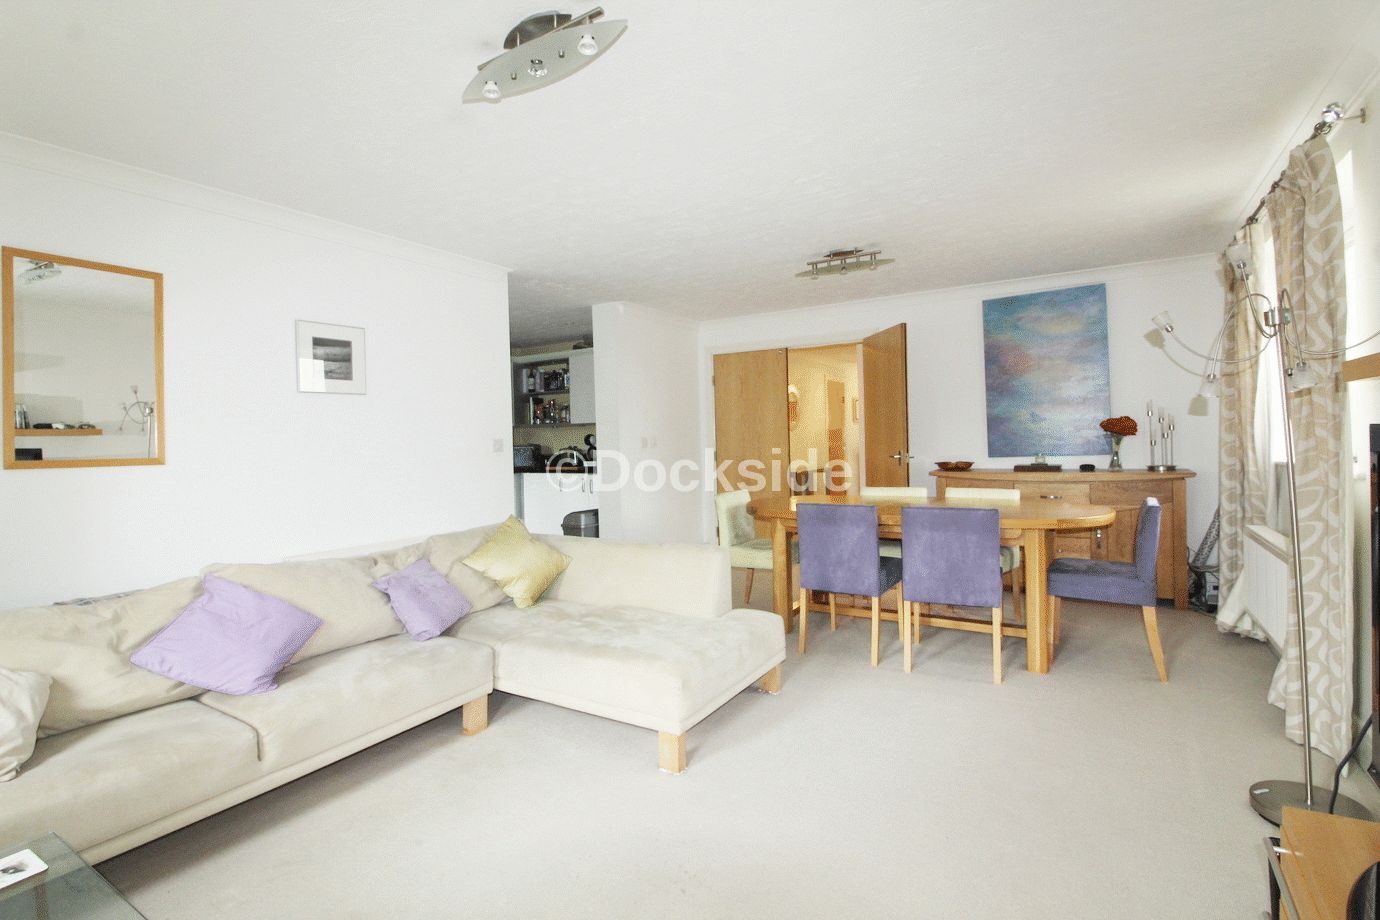 3 bed to rent in Rivermead, Chatham - Property Image 1